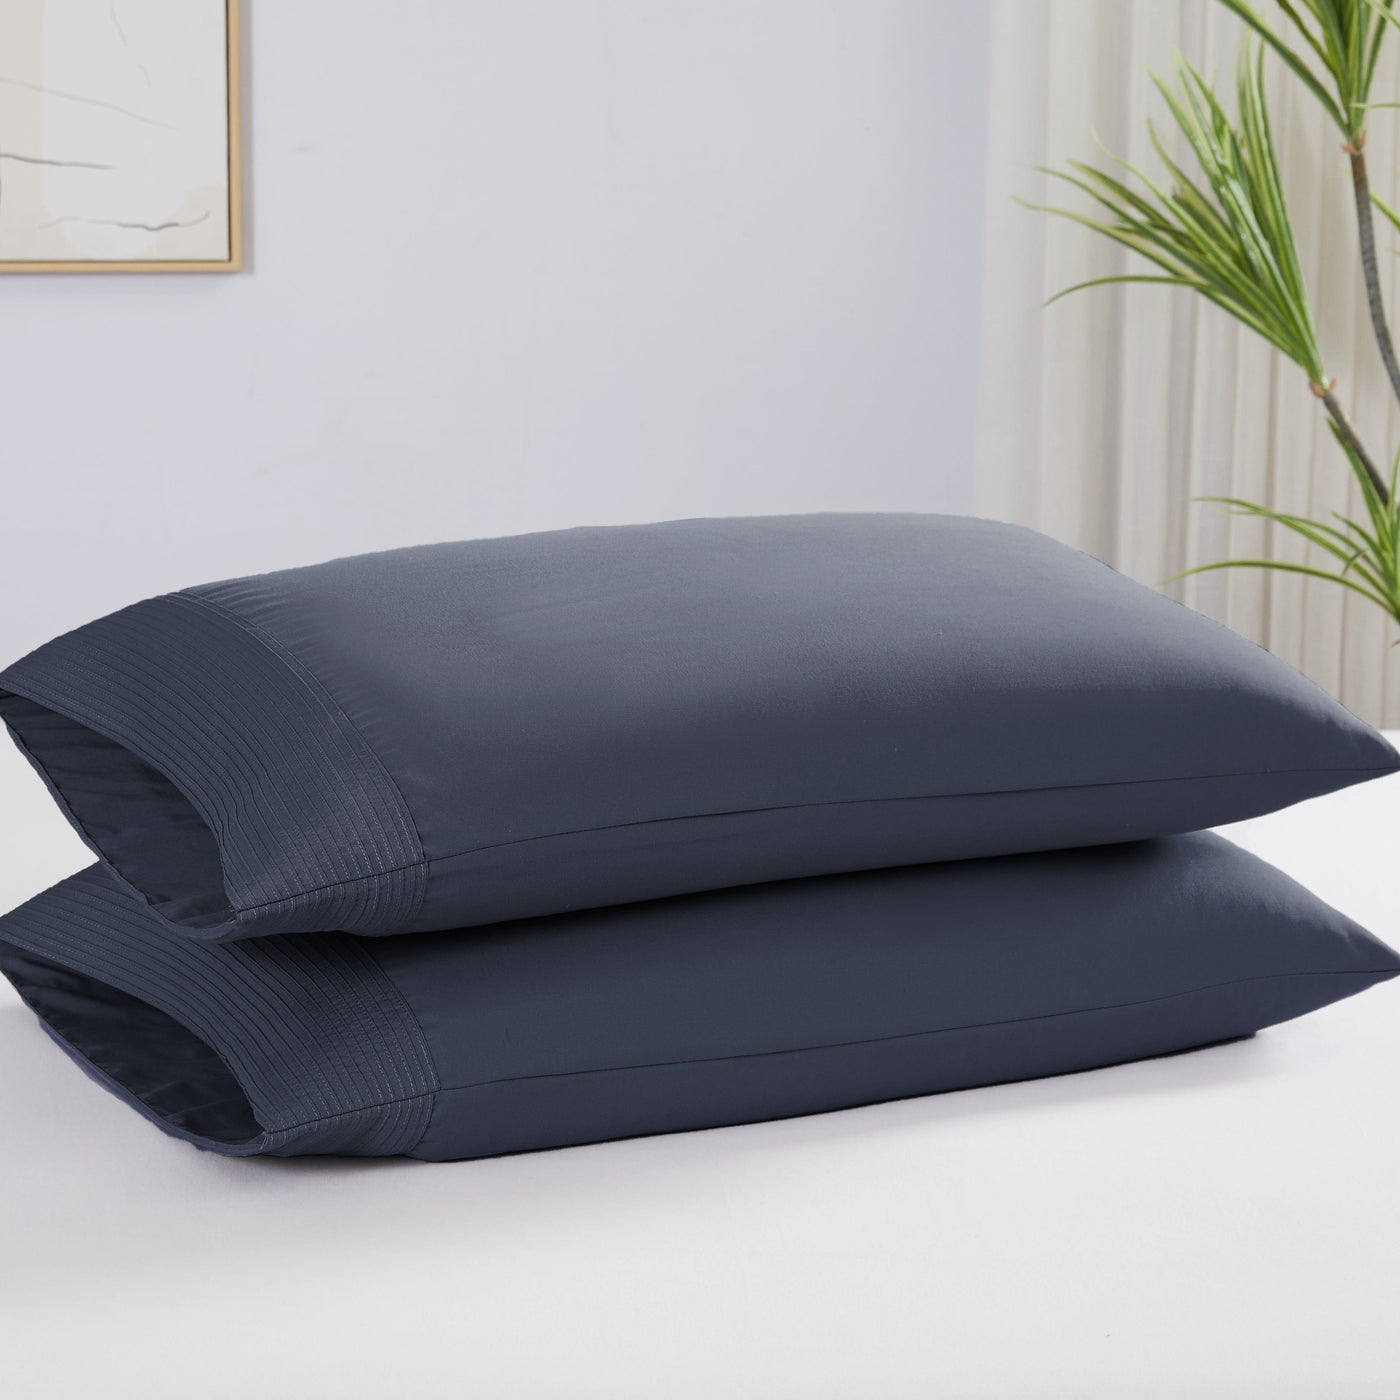 Two Vilano Pleated Pillow Cases in Dark Blue Stack Together#color_vilano-dark-blue